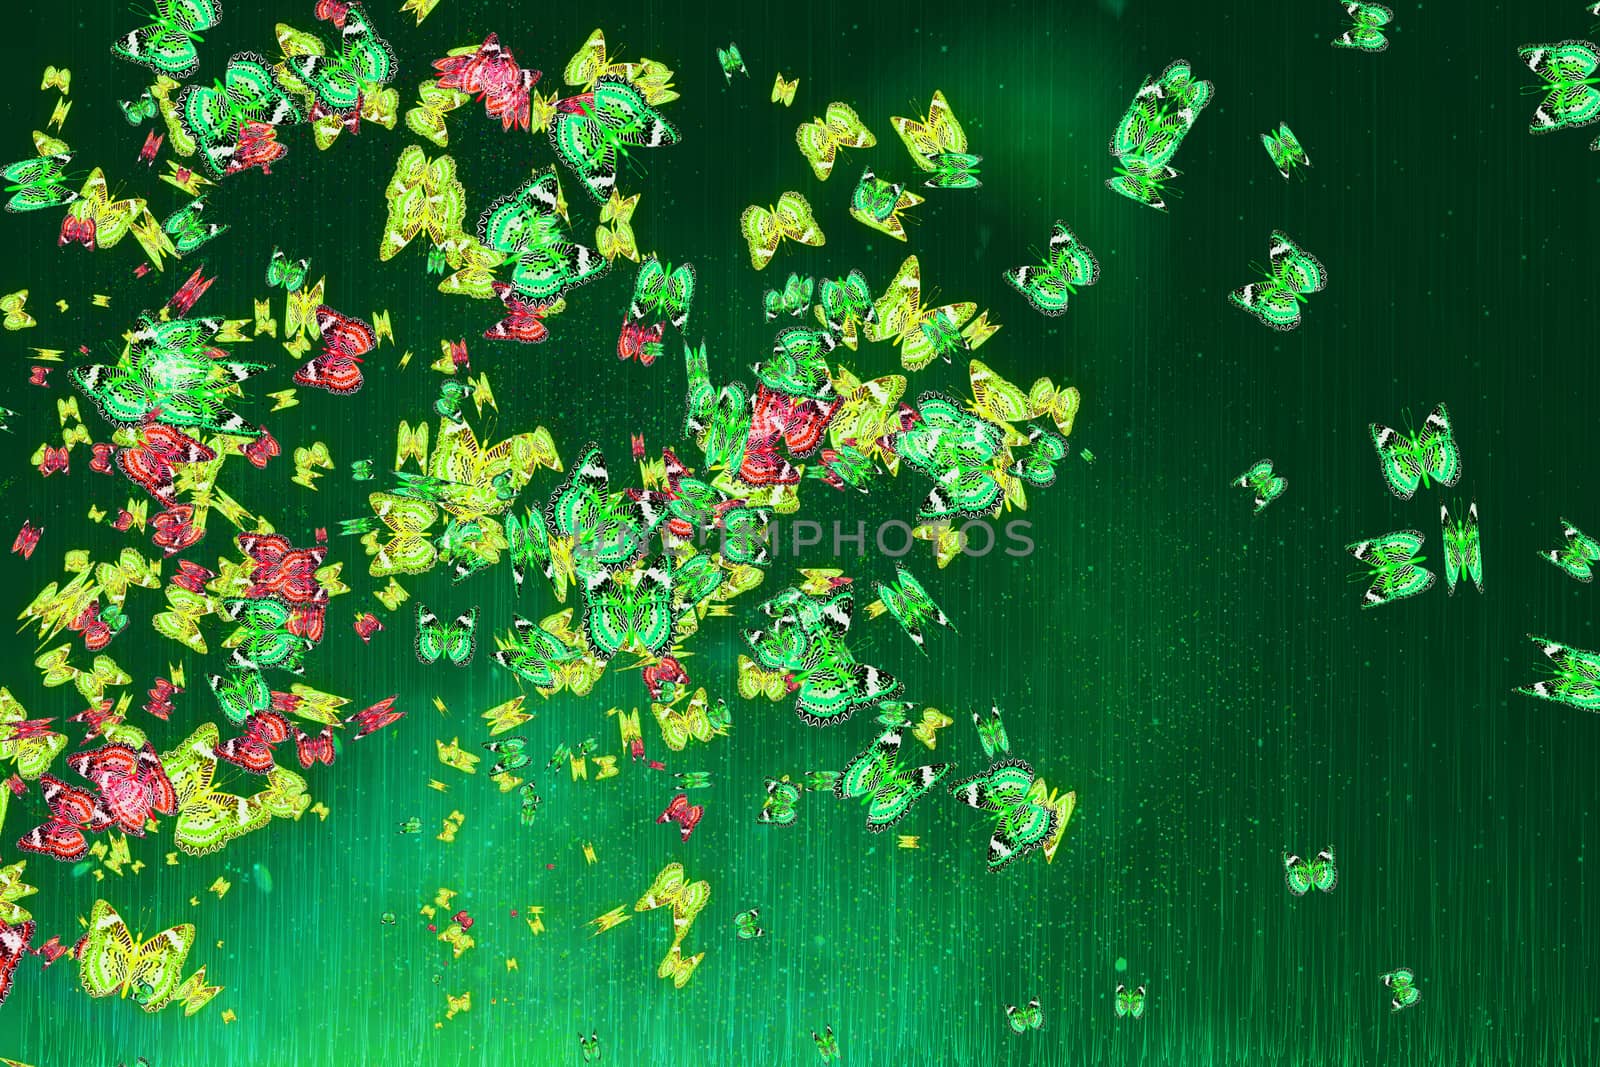 Multicolored butterflies on a dark green background by lindamka